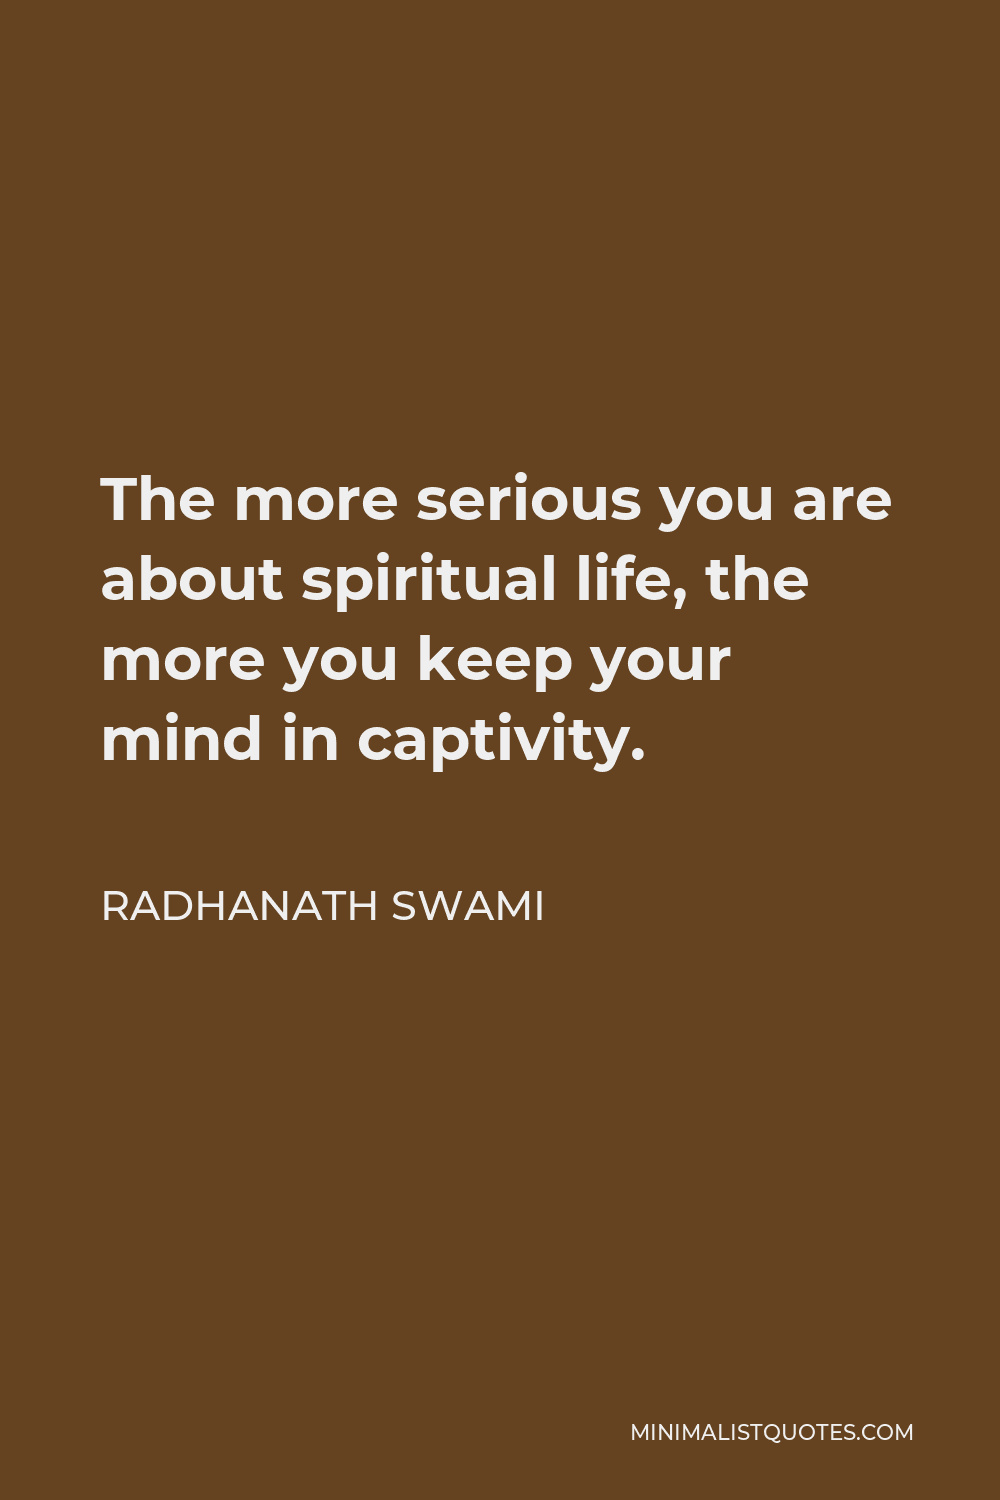 Radhanath Swami Quote - The more serious you are about spiritual life, the more you keep your mind in captivity.